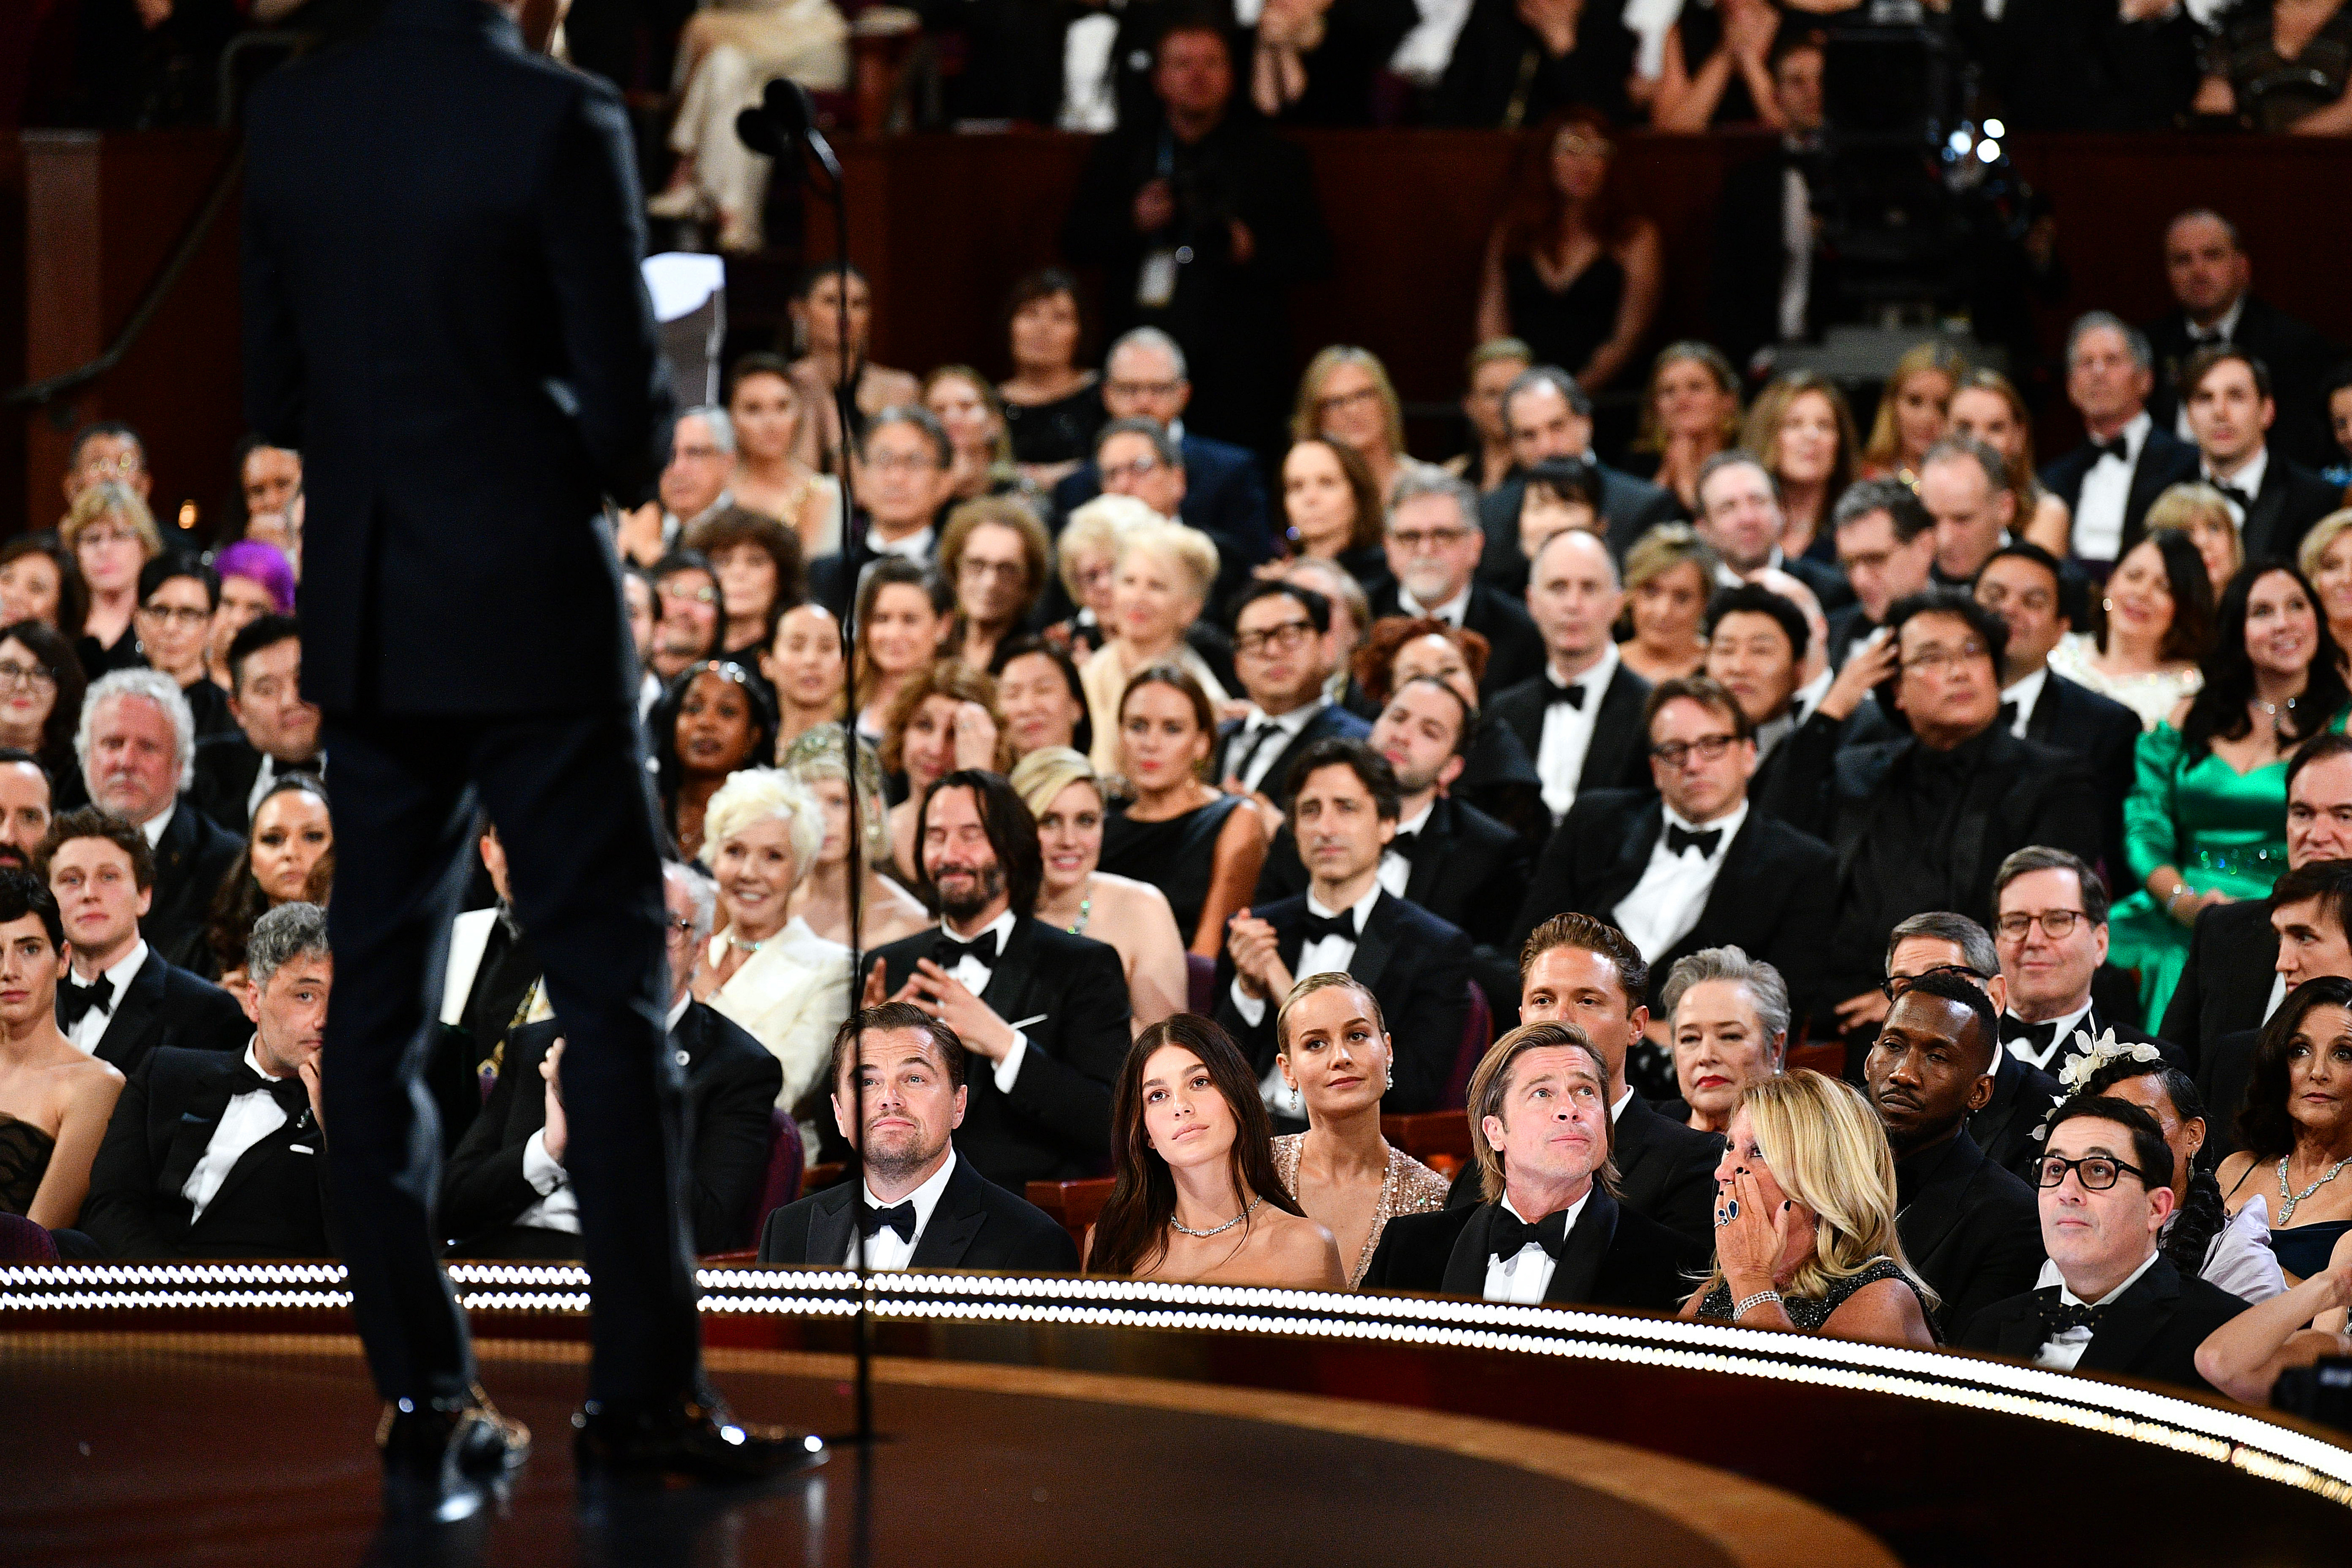 Audience in formal attire watches a person on stage at an awards ceremony